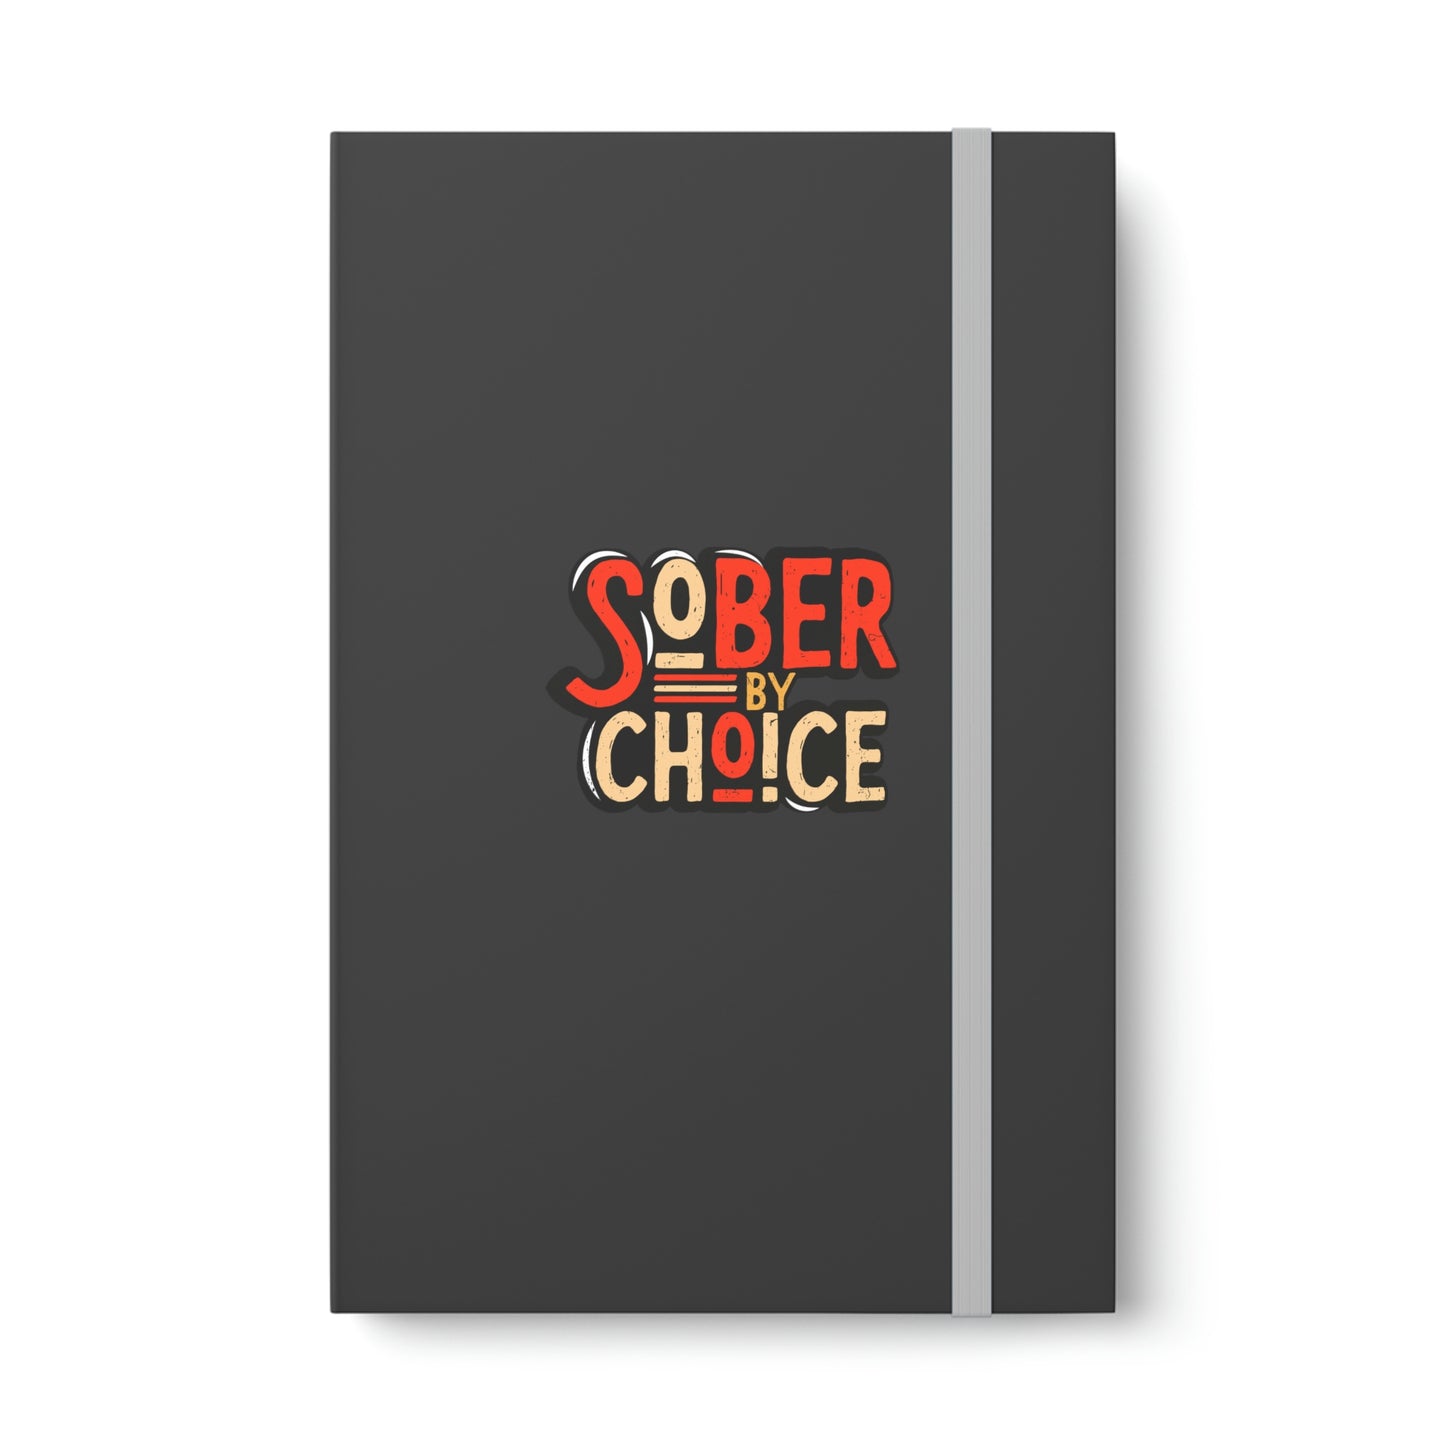 Sober By Choice - Contrast Notebook - Ruled